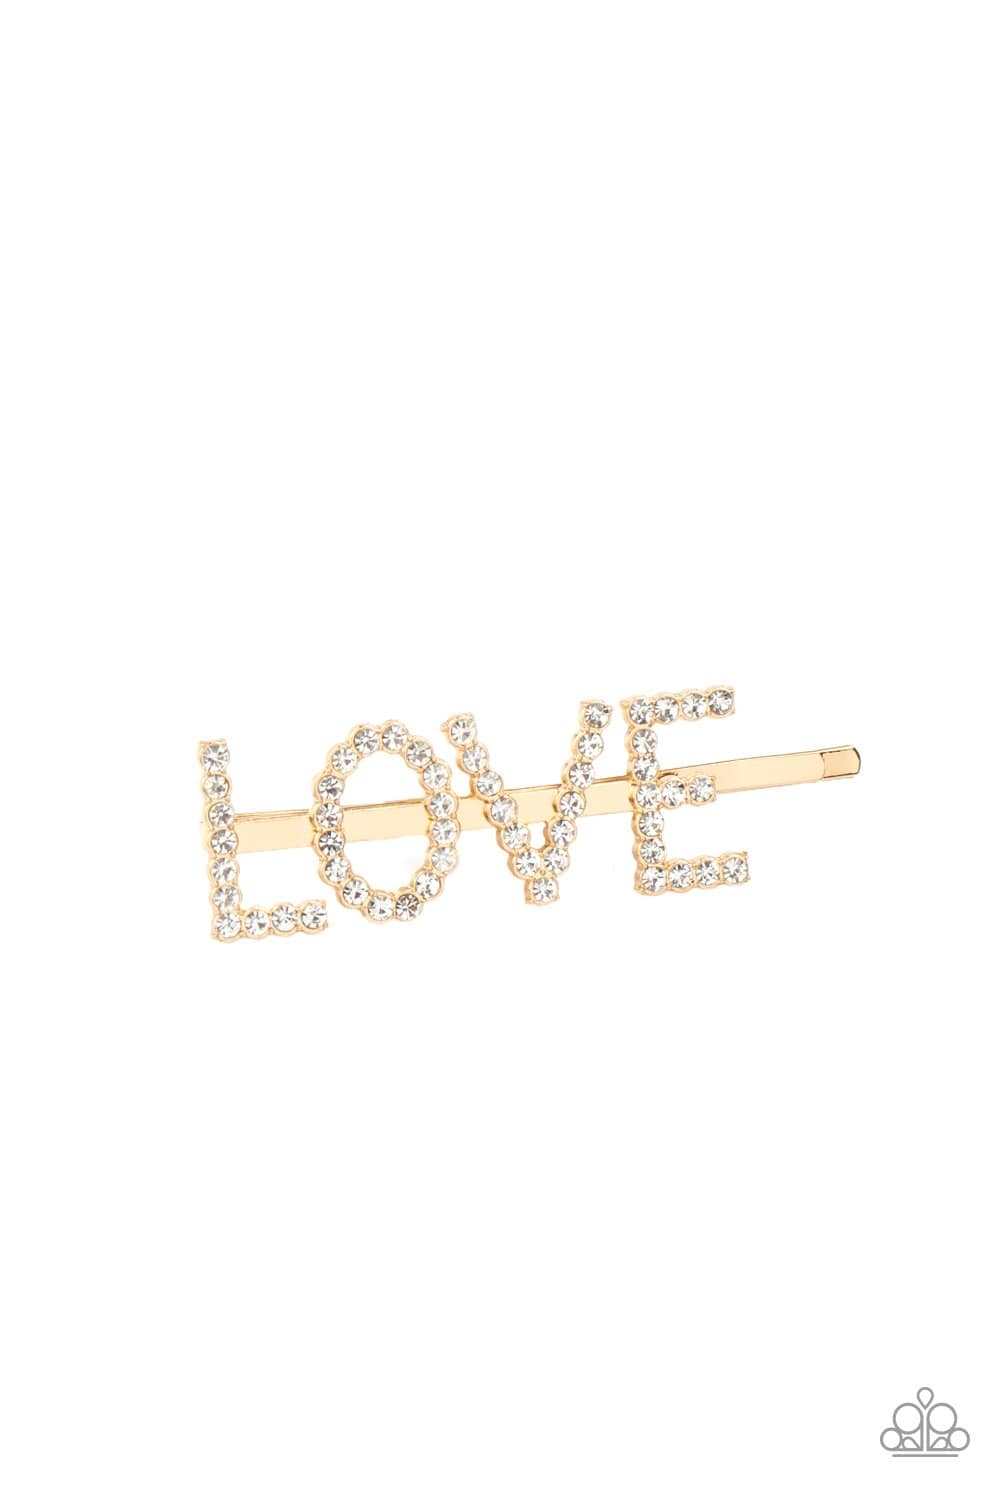 Paparazzi: All You Need Is Love - Gold Rhinestone Bobby pin - Jewels N’ Thingz Boutique